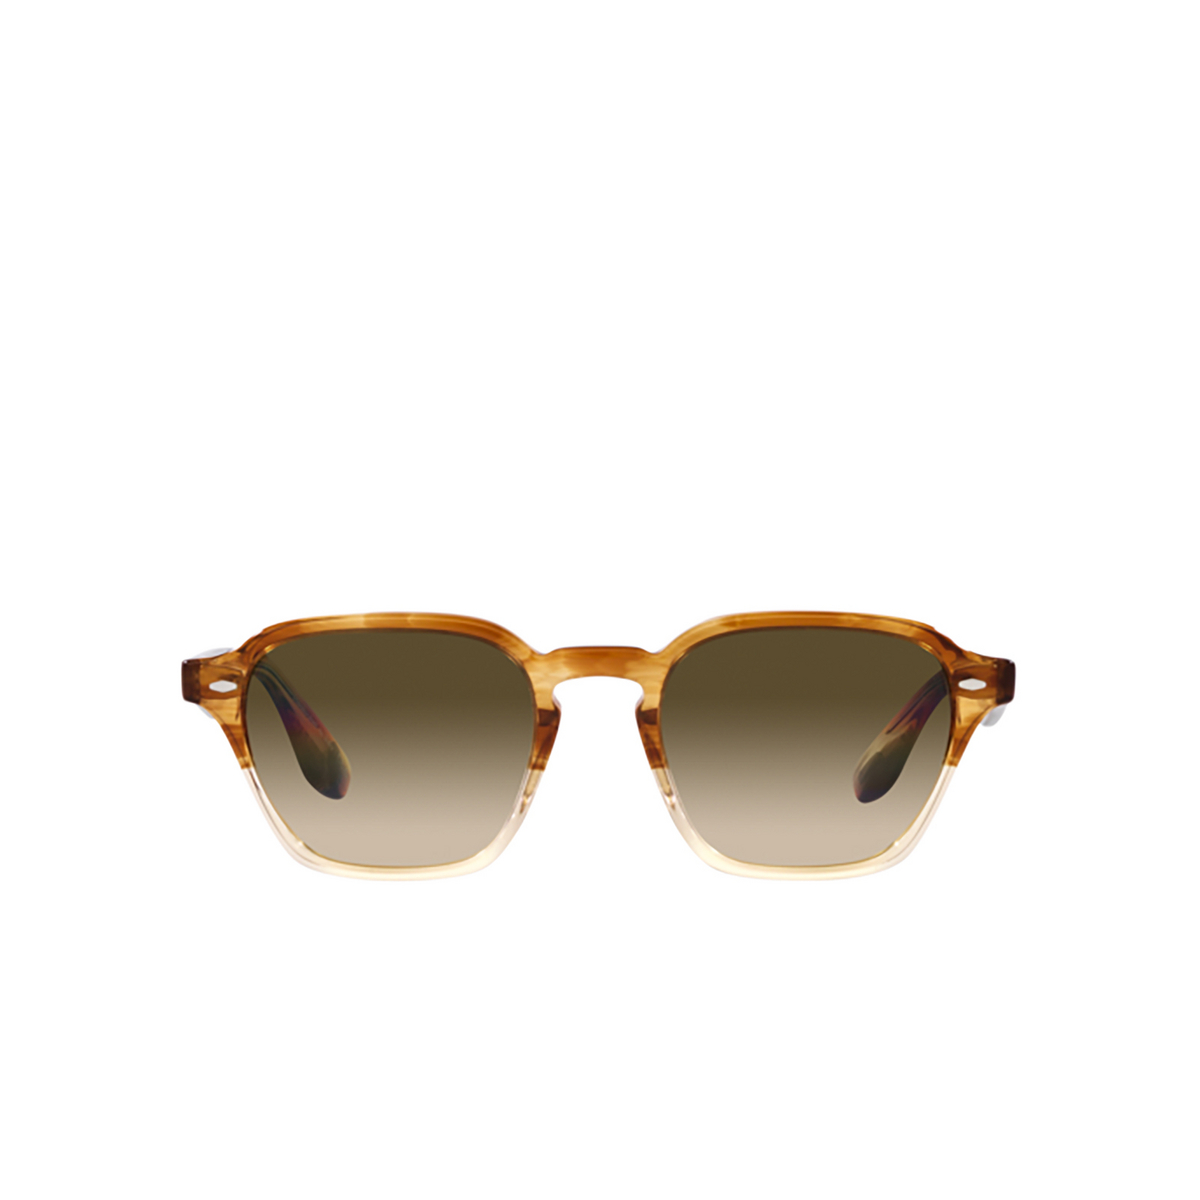 Oliver Peoples GRIFFO Sunglasses 167485 Honey vsb - front view